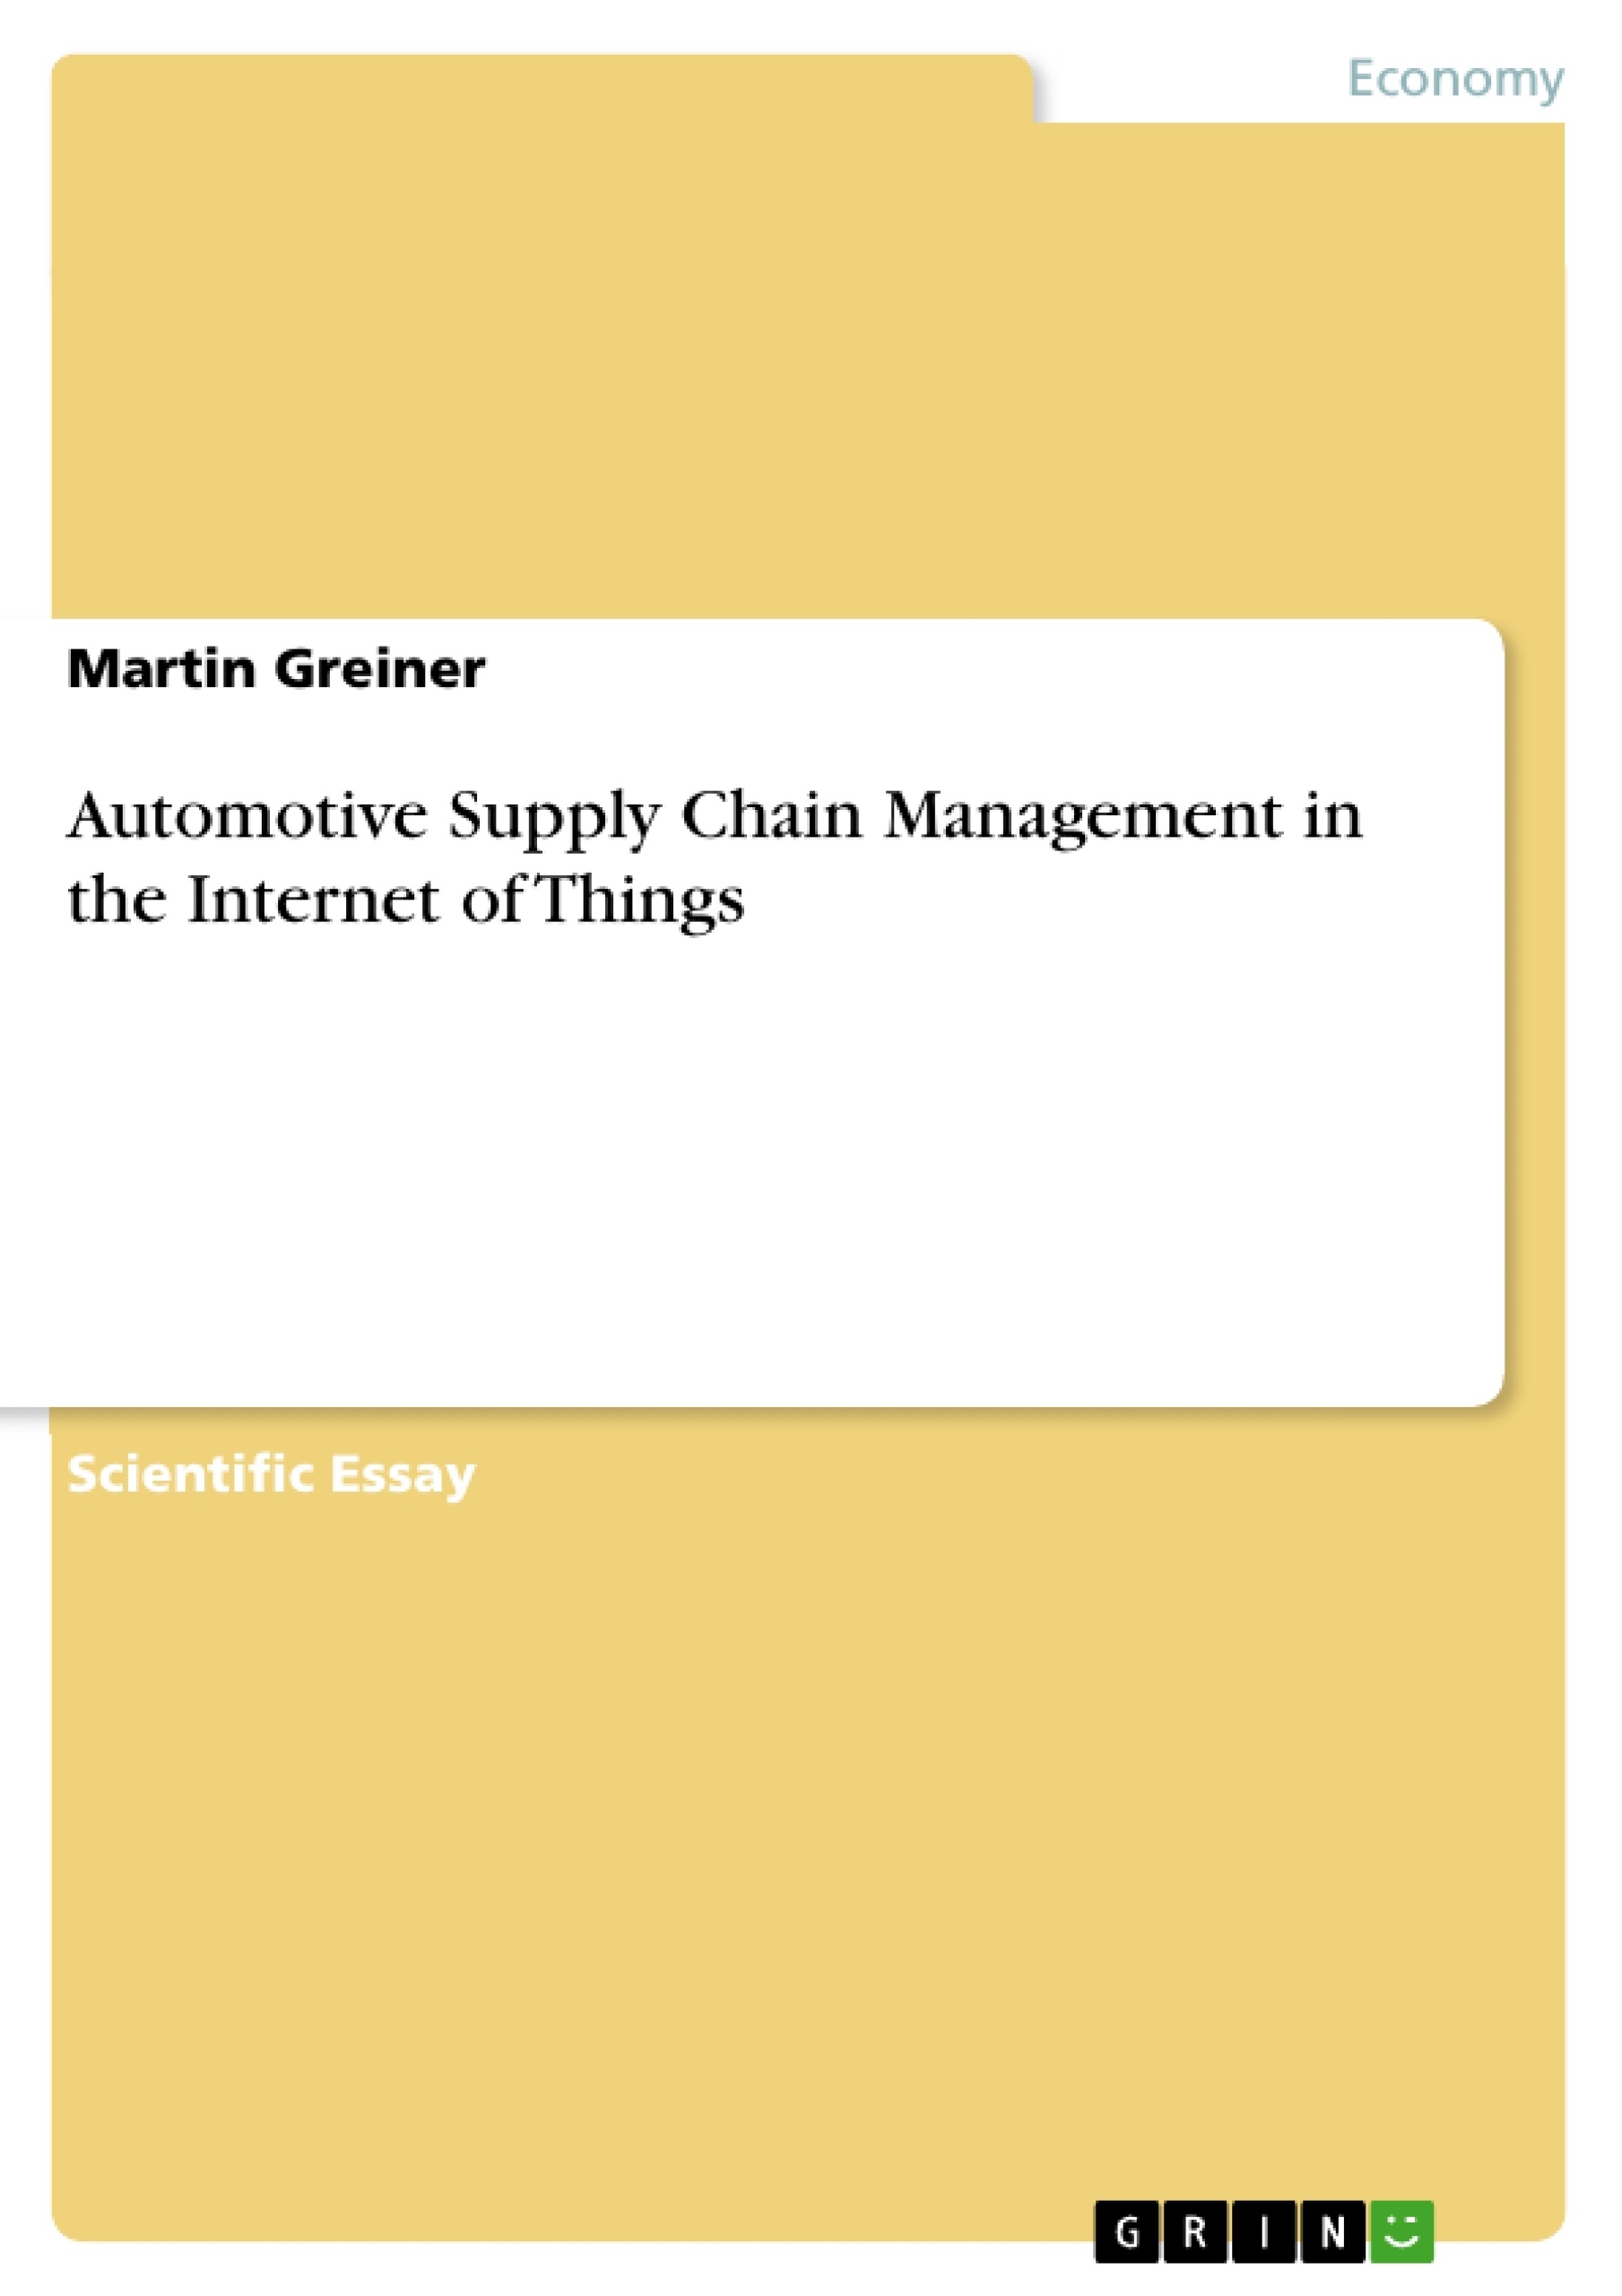 Title: Automotive Supply Chain Management in the Internet of Things